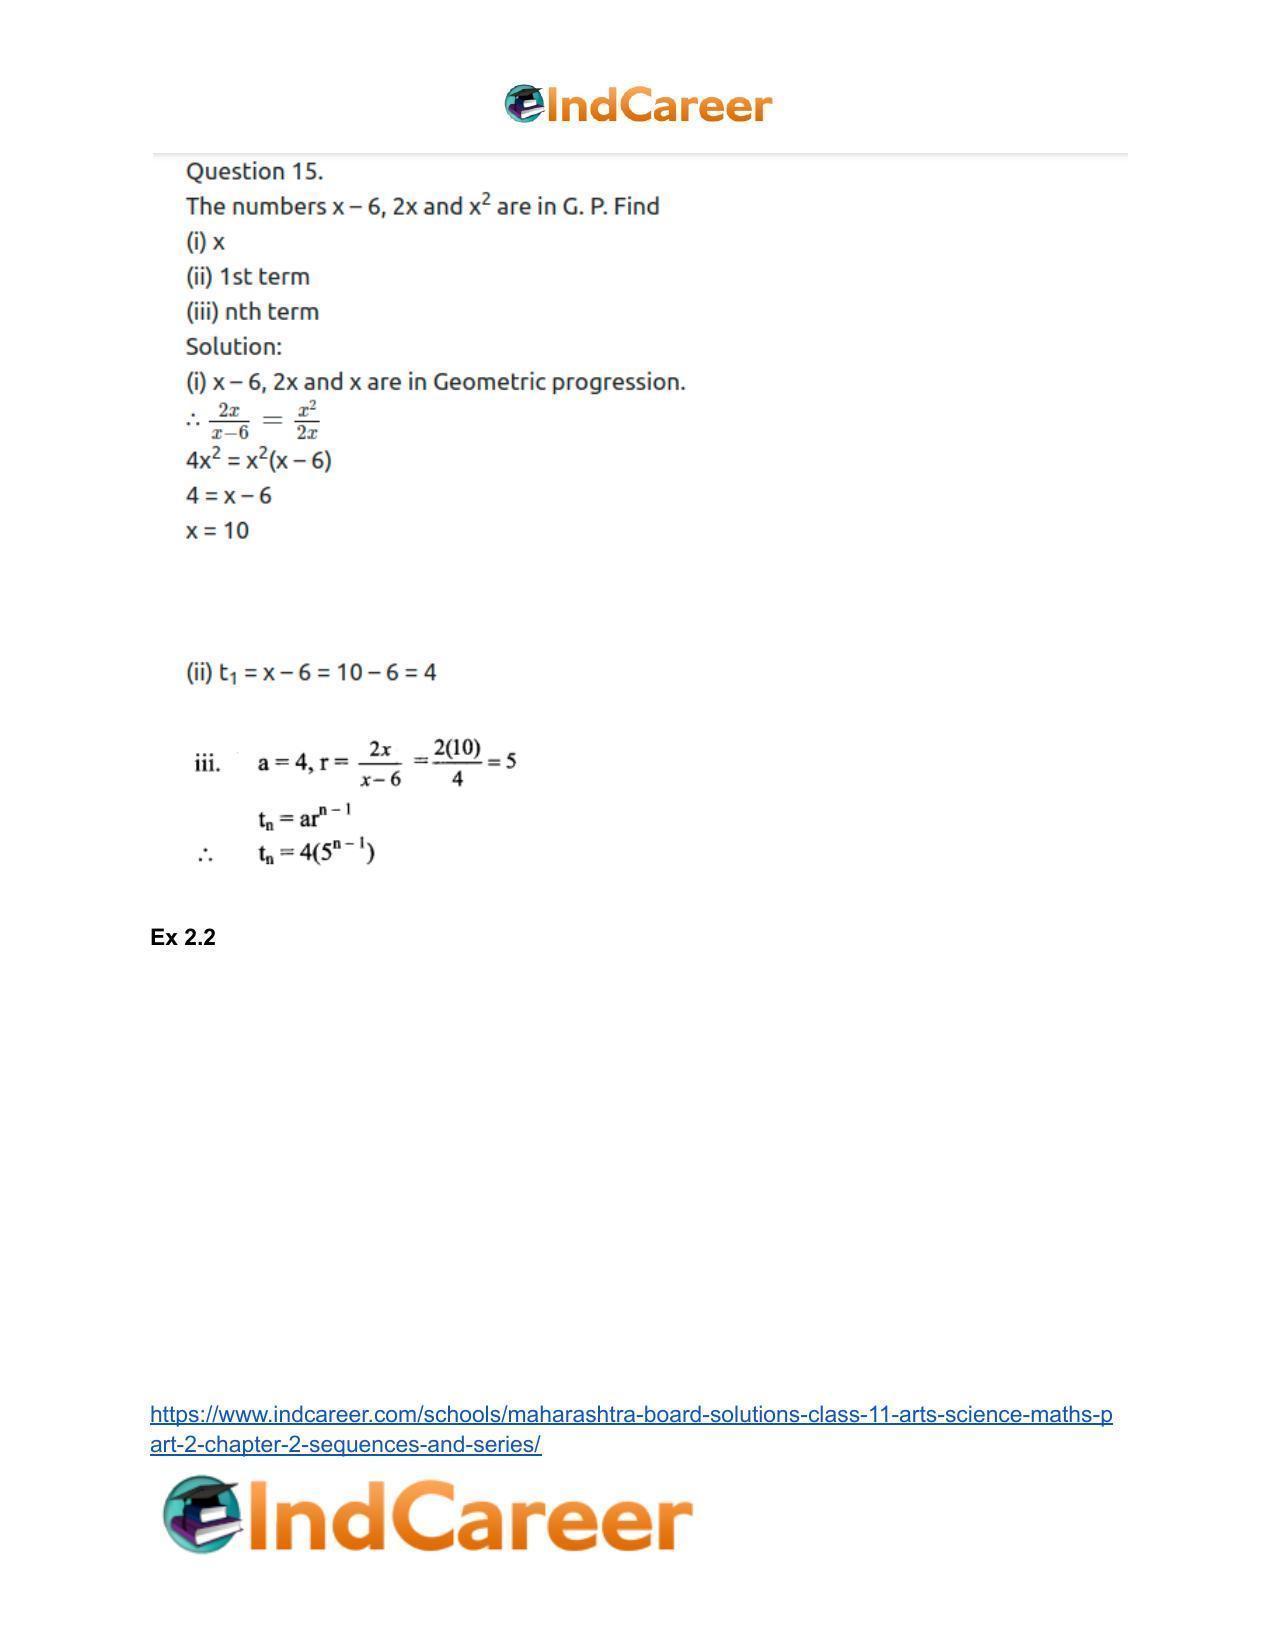 Maharashtra Board Solutions Class 11-Arts & Science Maths (Part 2): Chapter 2- Sequences and Series - Page 20